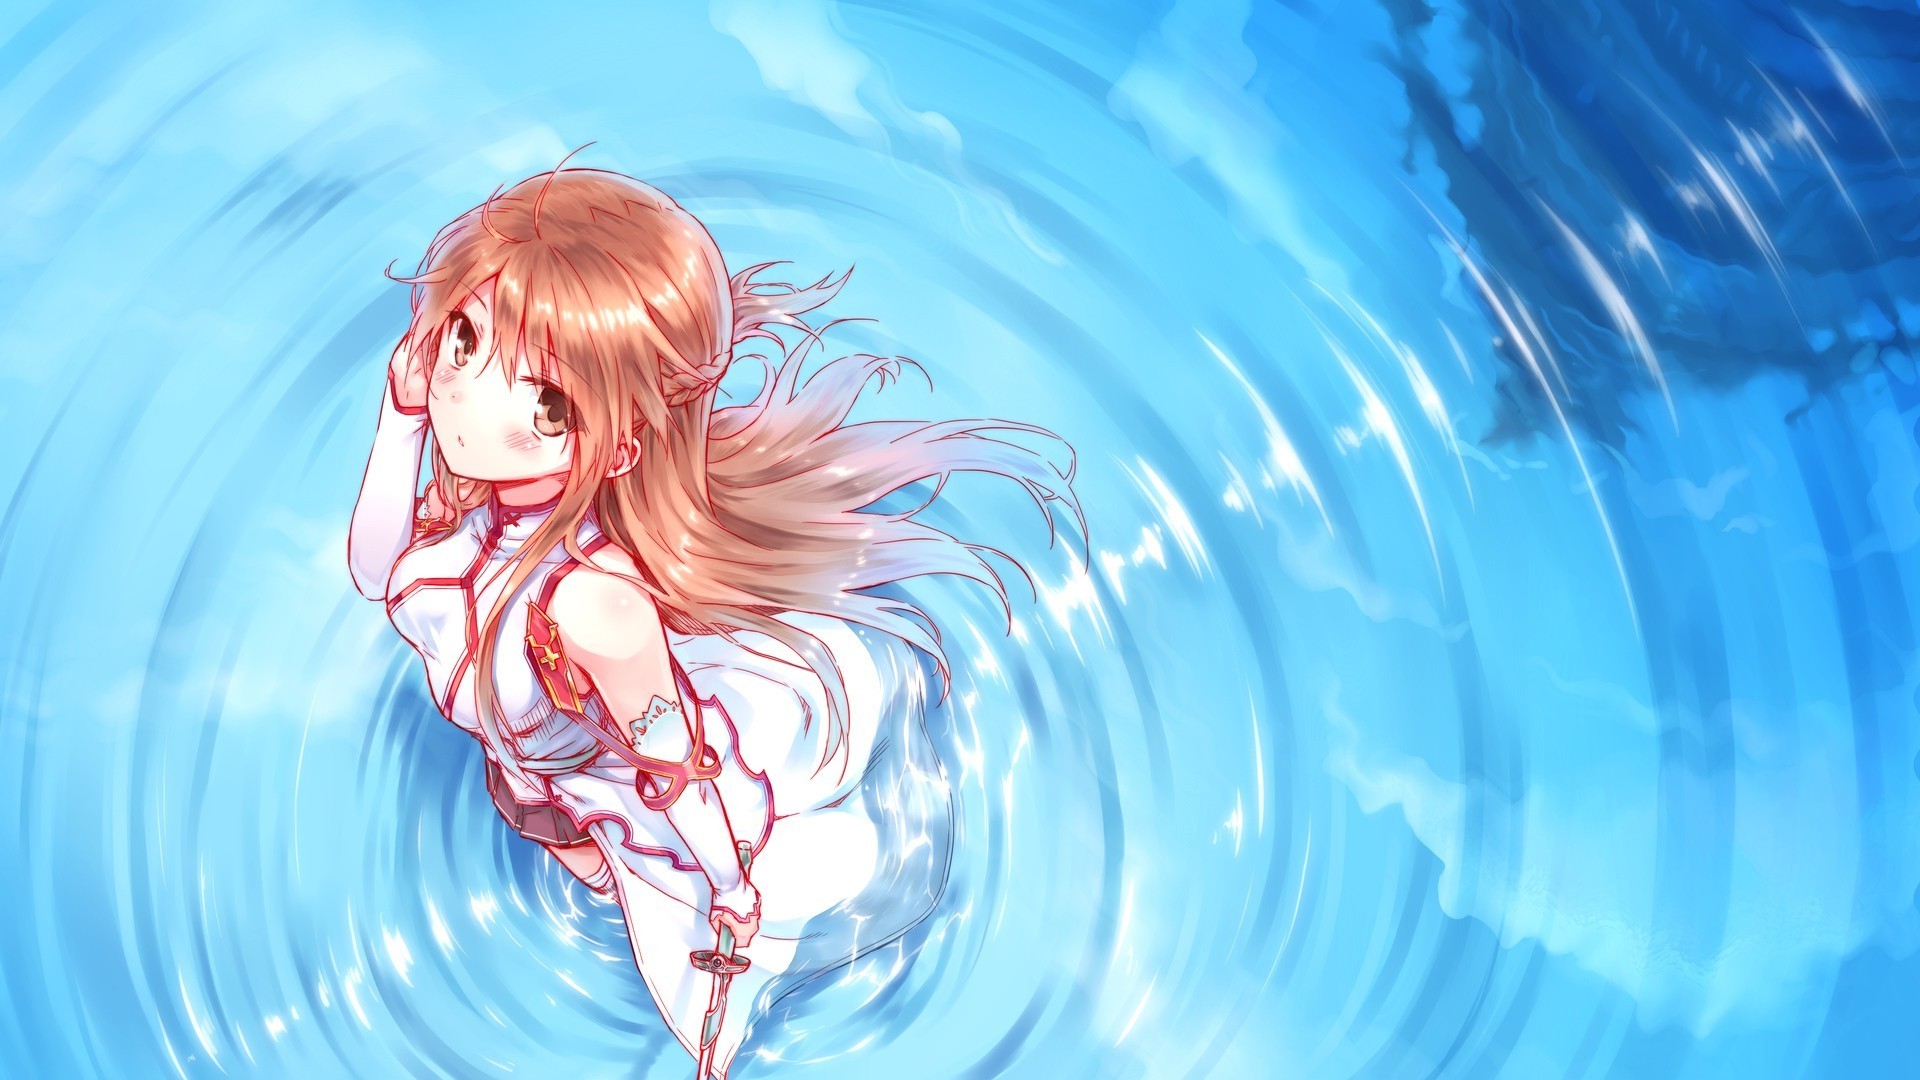 Girl In Water Anime Wallpapers